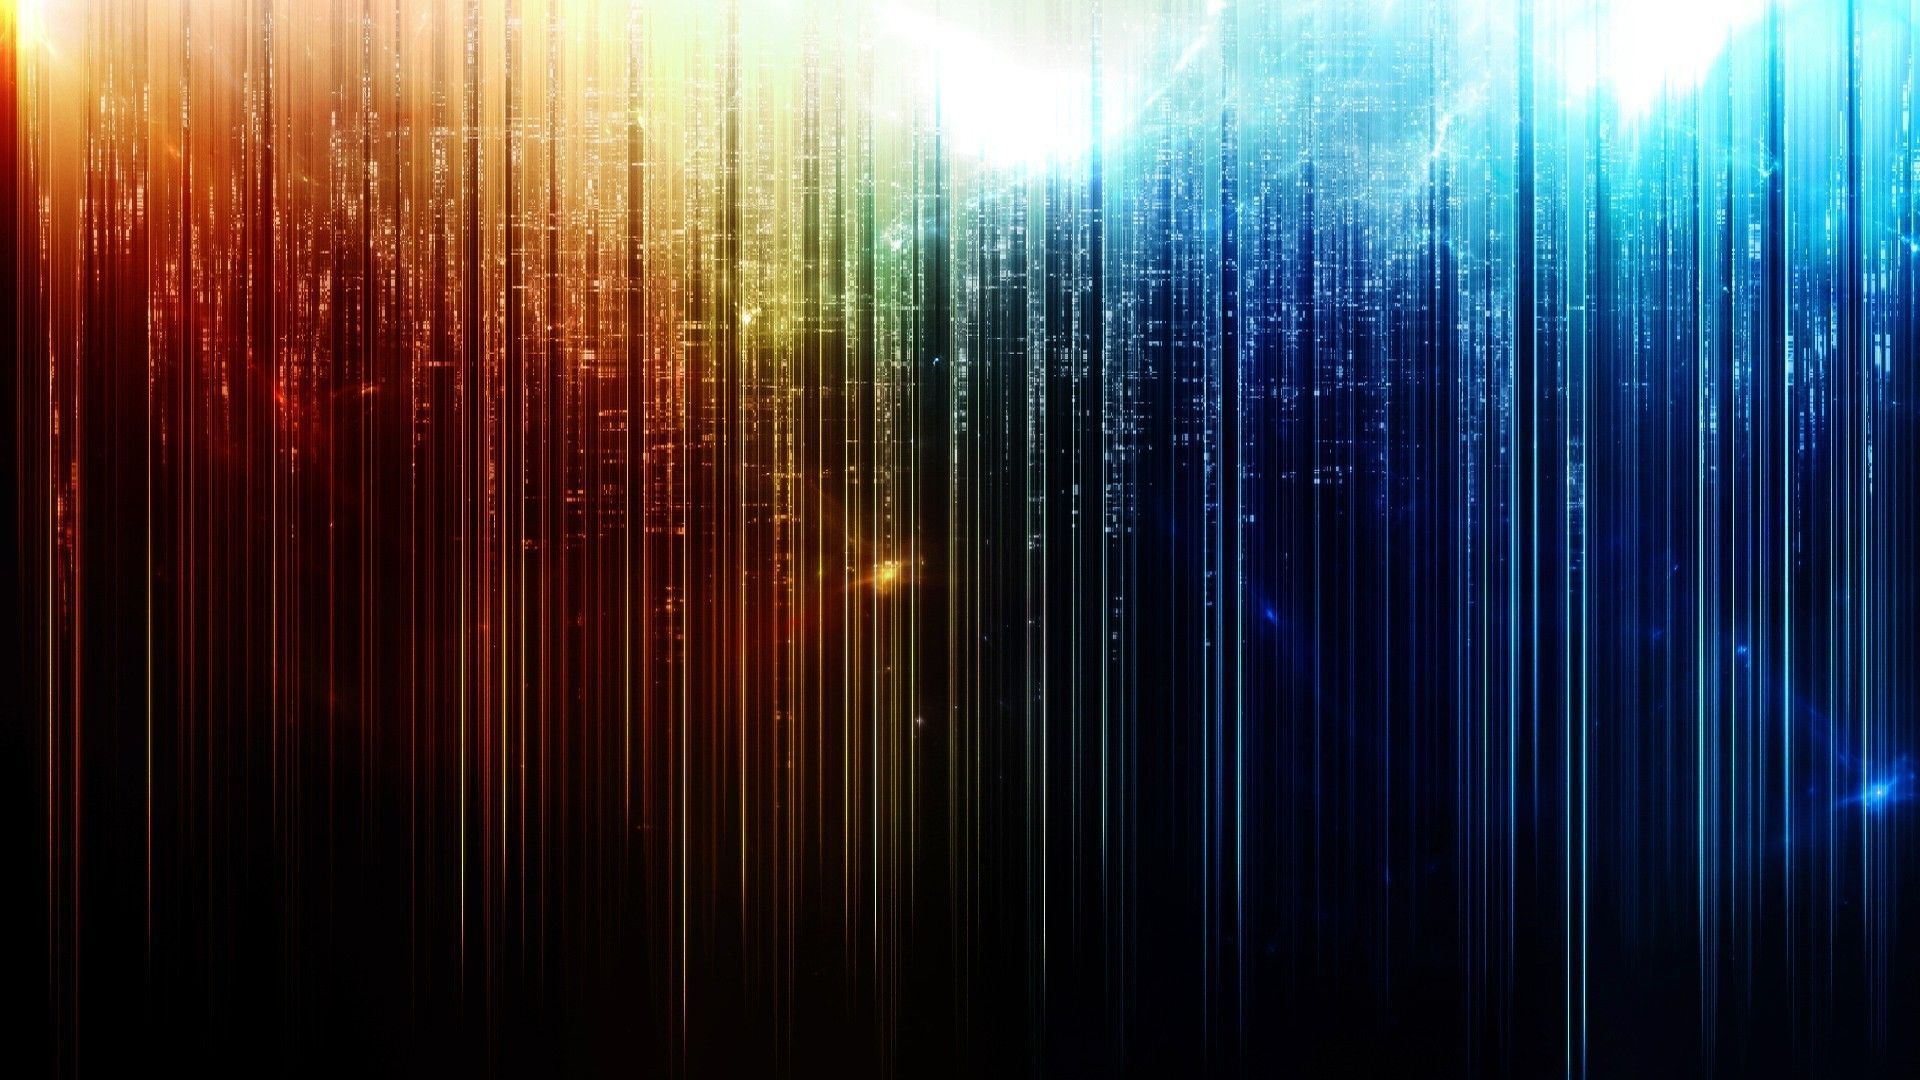 2024 Pattern HD Wallpapers | Backgrounds - Wallpaper Abyss